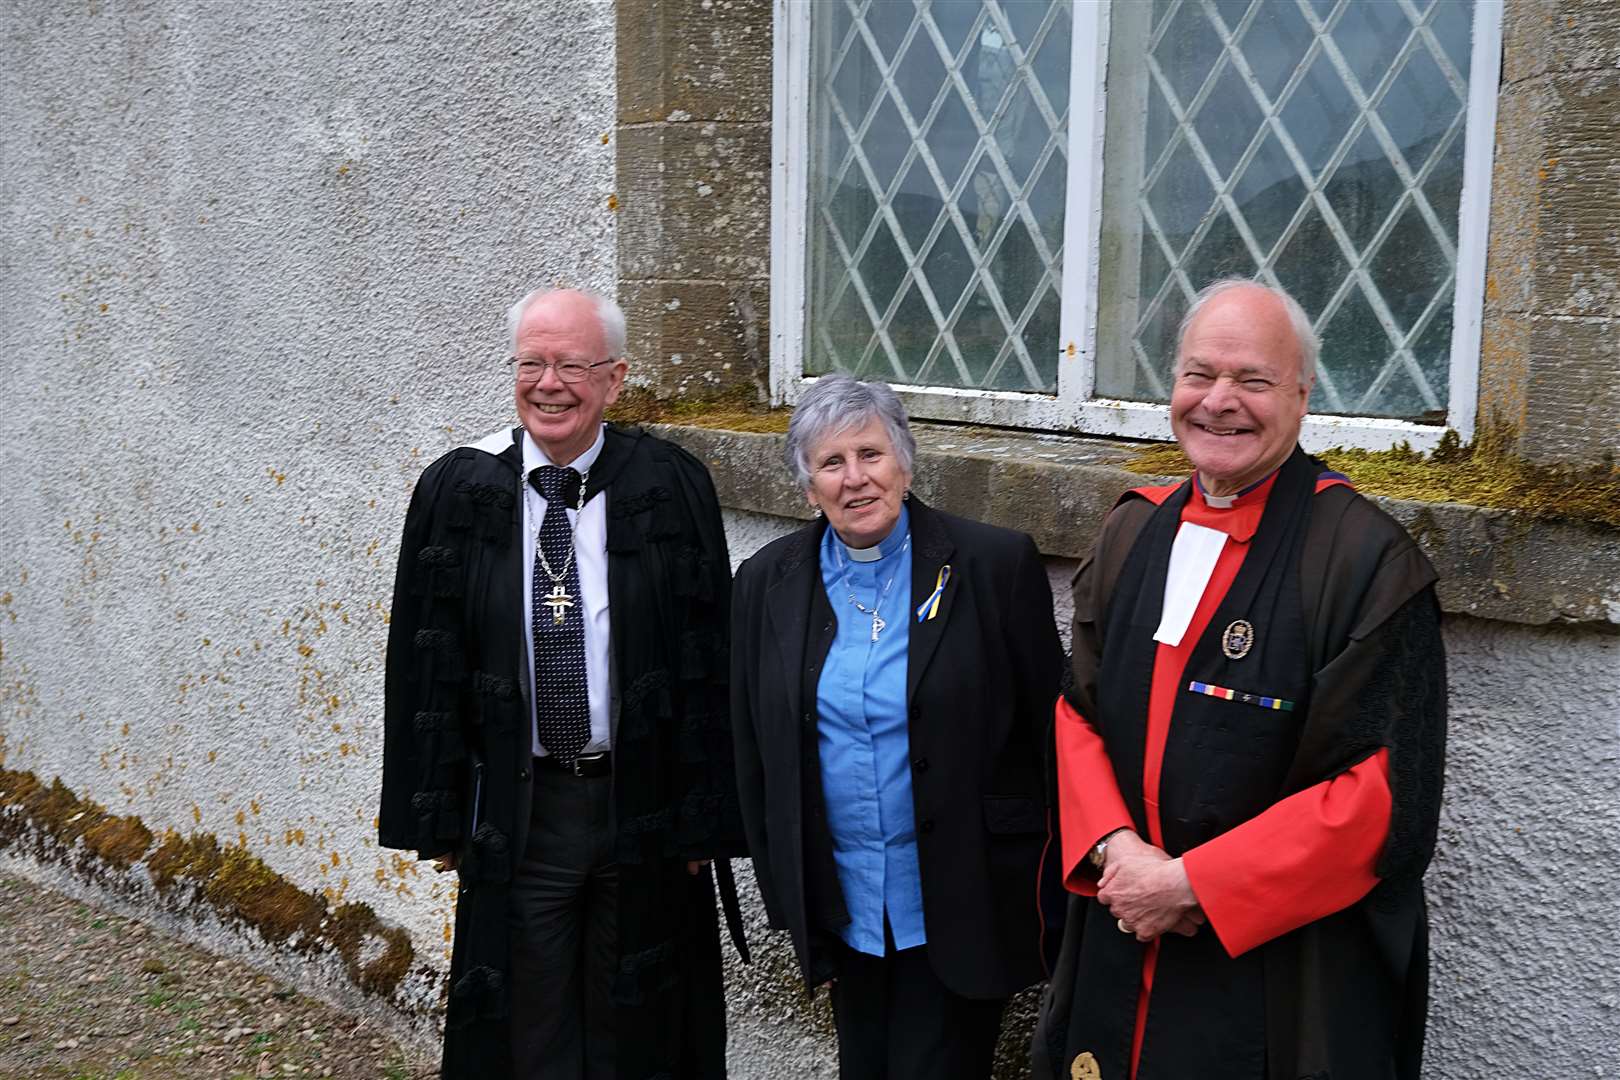 Lord Wallace (left), seen here with the Reverend Mary Stobo, session clerk for Kincardine, Croick and Edderton churches, and Professor Iain Torrance, viewed the window of the historic Croick church which has names engraved on it from Glencalvie releases.  Photo: Marc Foggin.